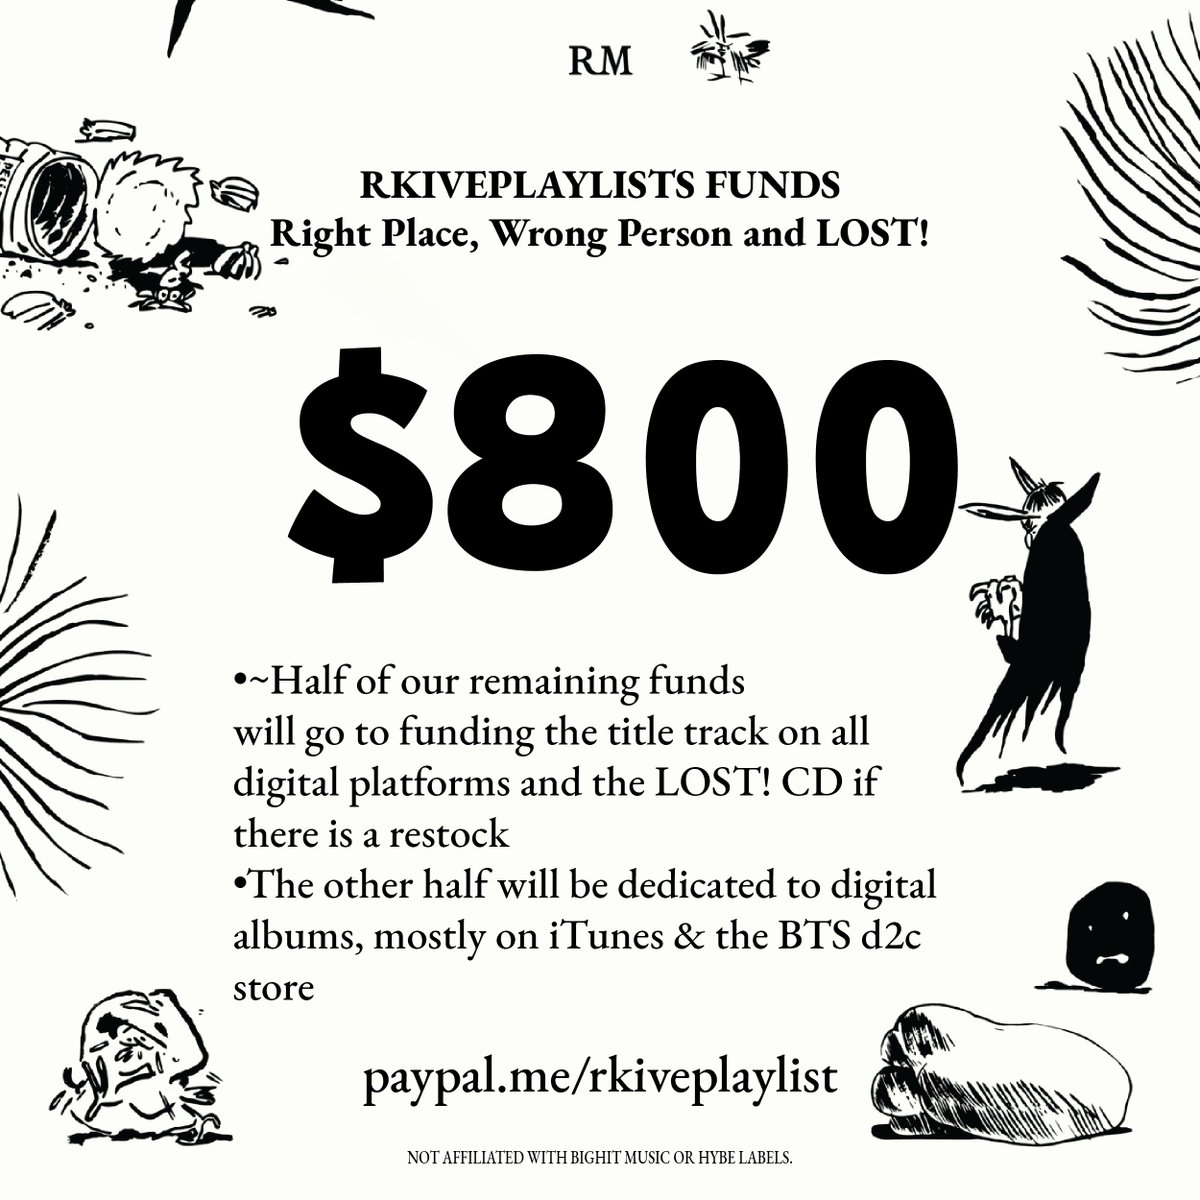 We are still fundraising for #RightPlaceWrongPerson and #RM_LOST! Funding requests for the CD were 🔥. The charts are ~strong~ right now. Even with $800, we want to do more and fund some physical albums too! FYI: $1000 = 76 digital albums, no tax •paypal.me/rkiveplaylist